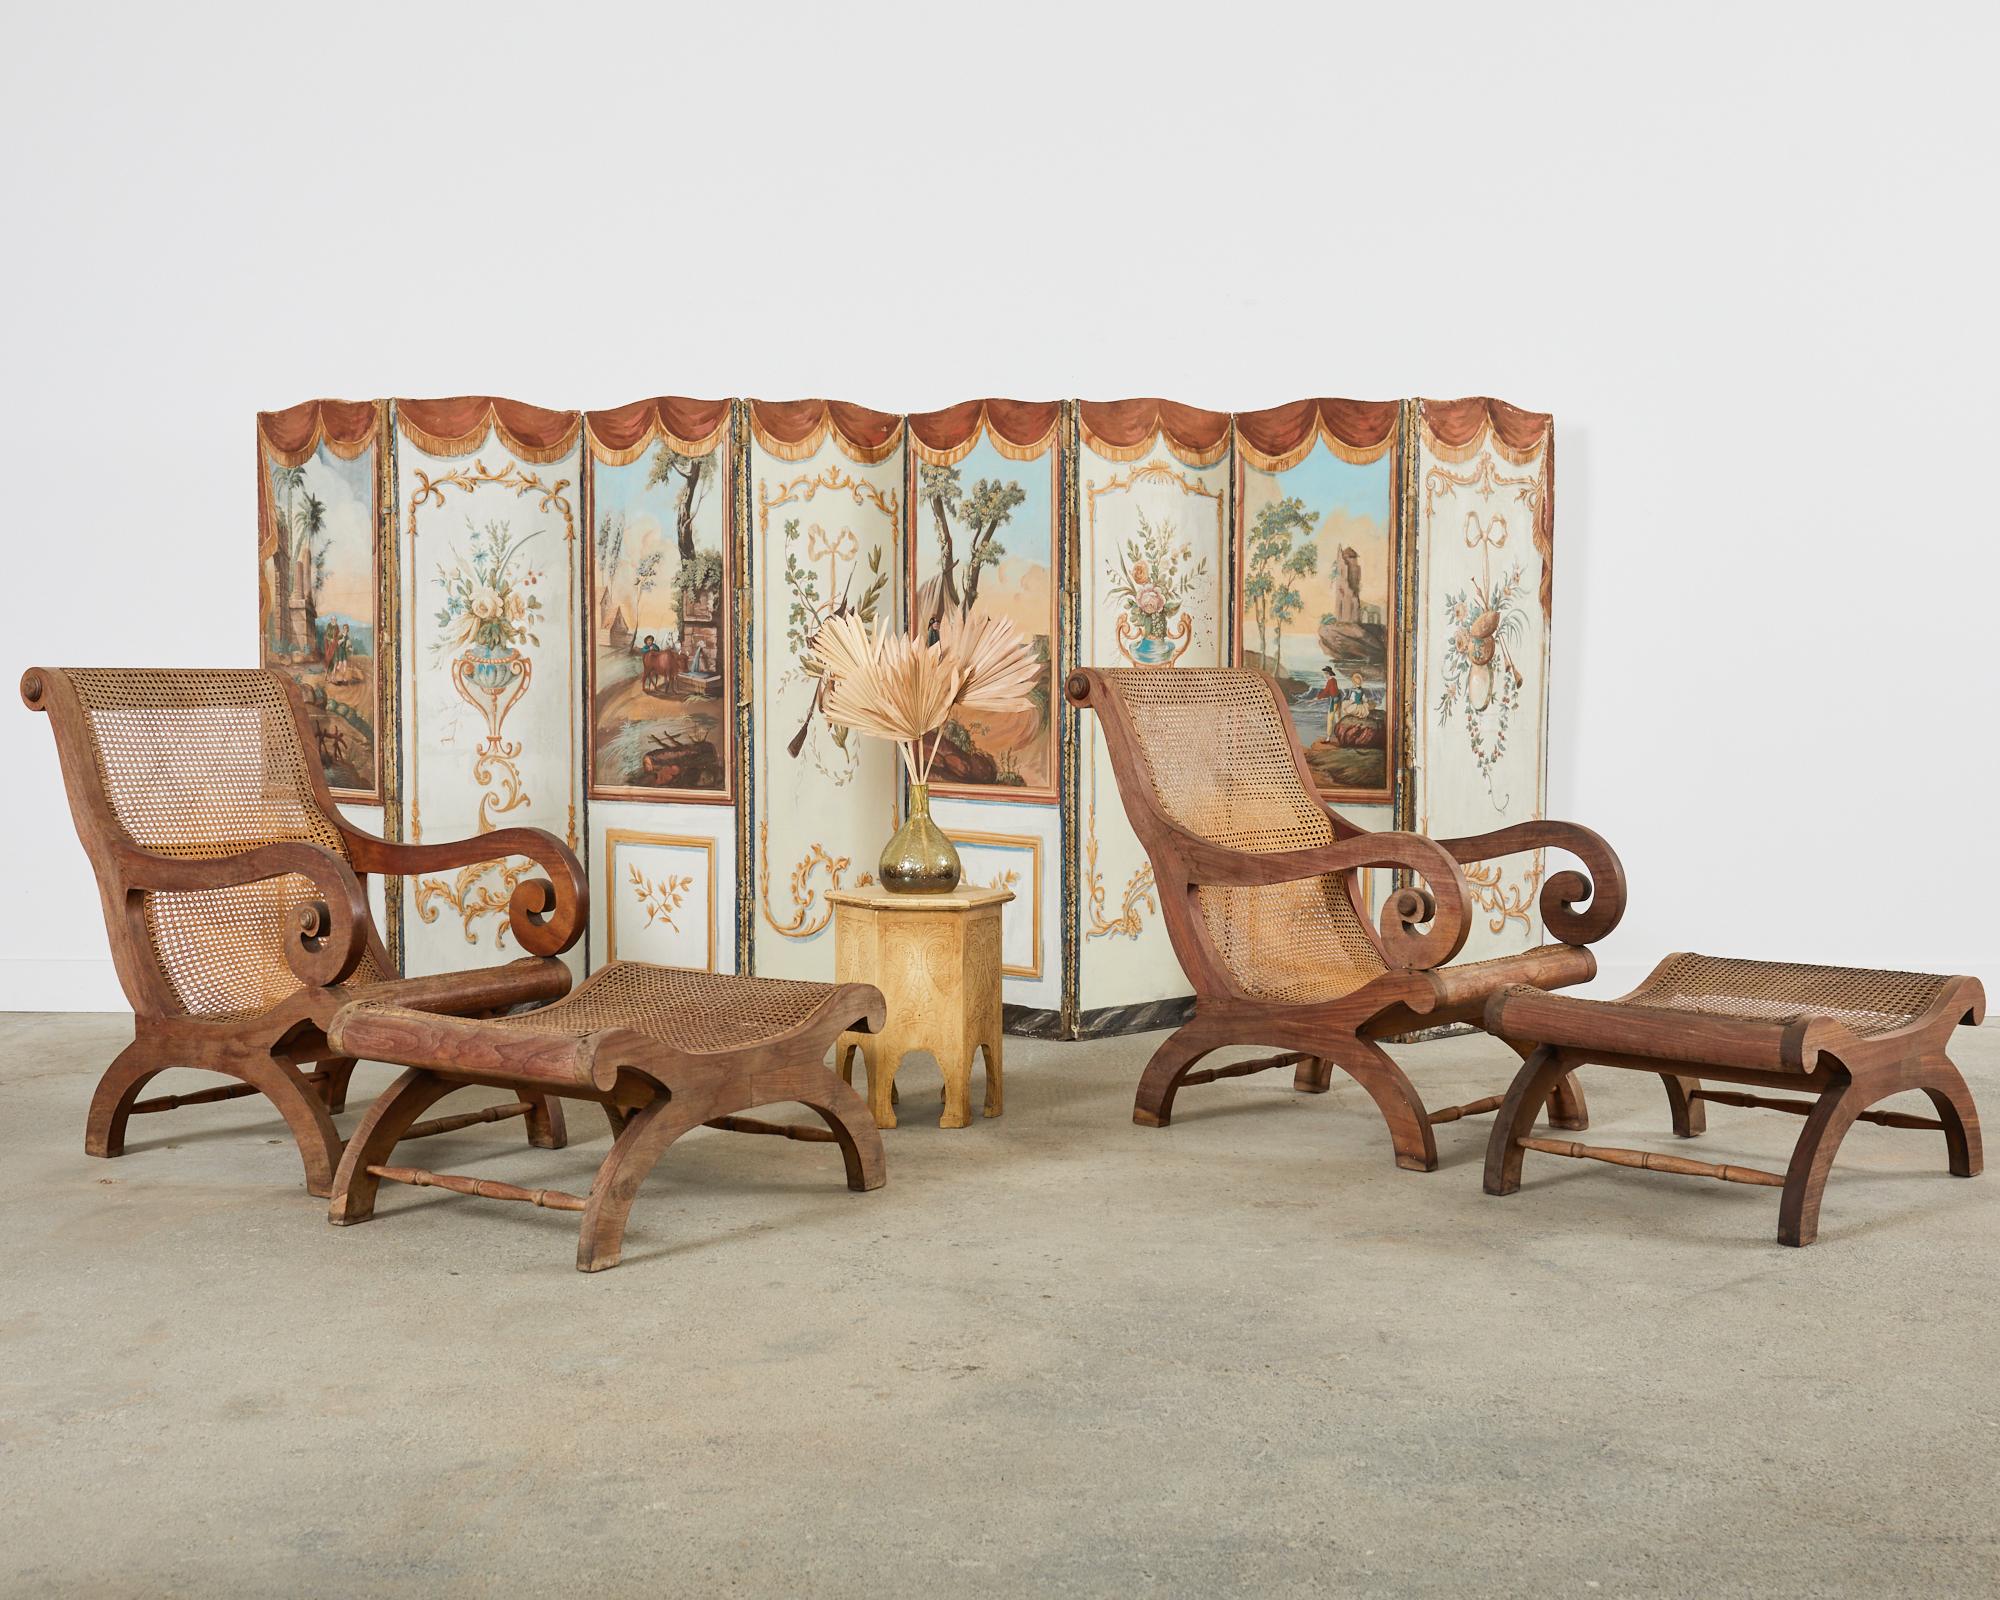 Gorgeous pair of Anglo-Indian plantation lounge chairs with matching ottomans made in the Grand British Colonial style. The chairs feature a gracefully carved teak frame with large scrolled arms. The seat and back is caned and the cane is intact.